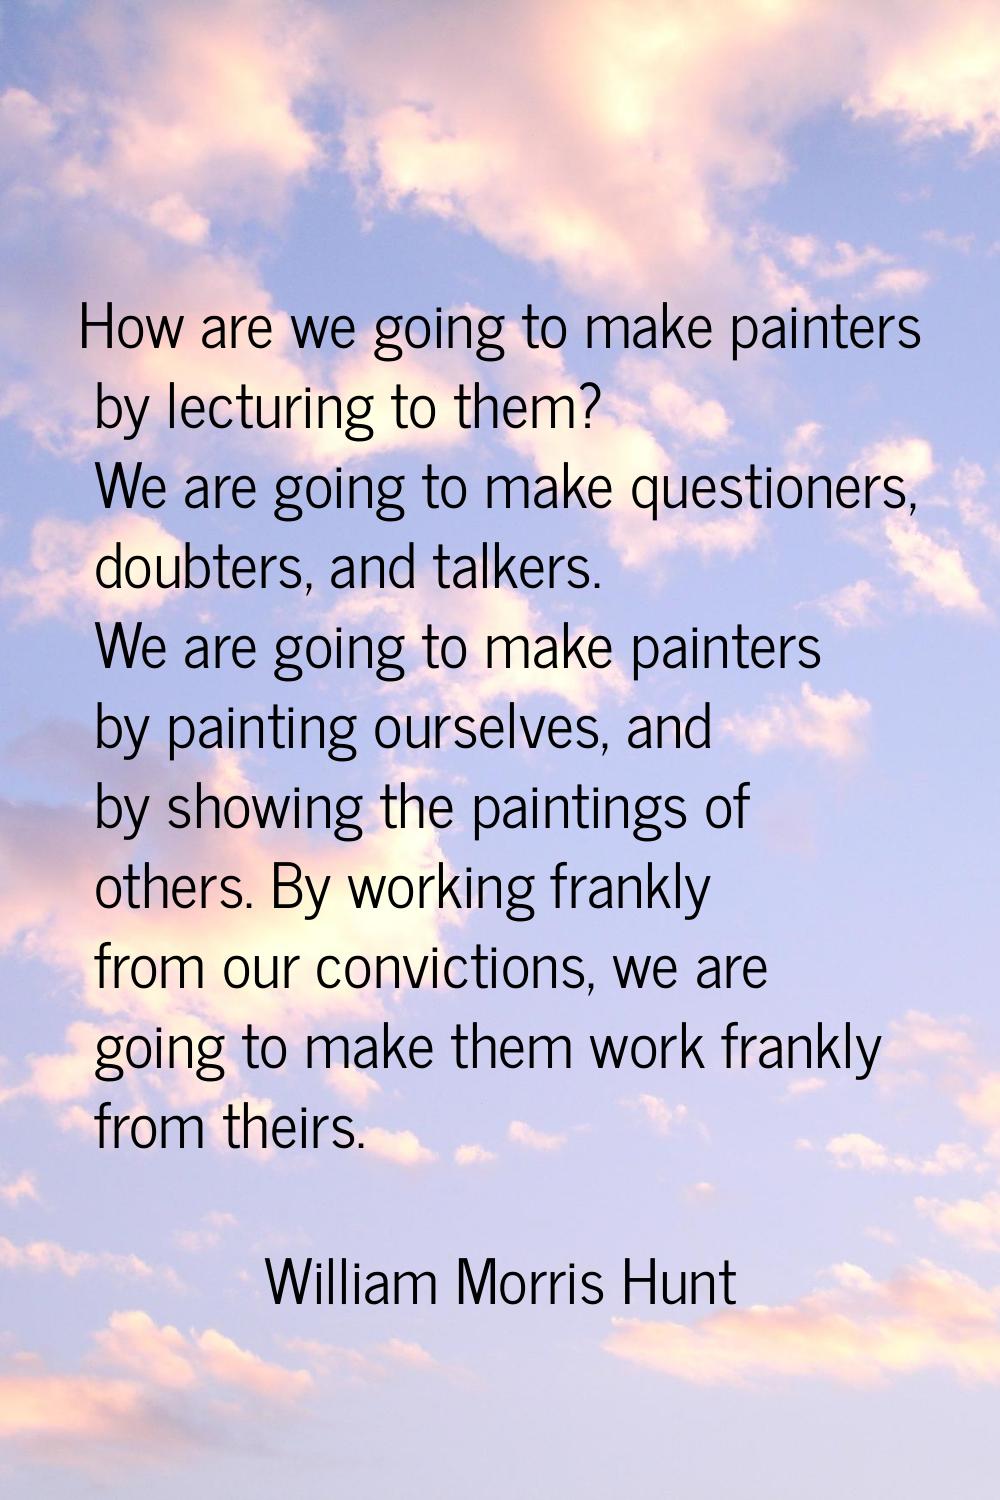 How are we going to make painters by lecturing to them? We are going to make questioners, doubters,